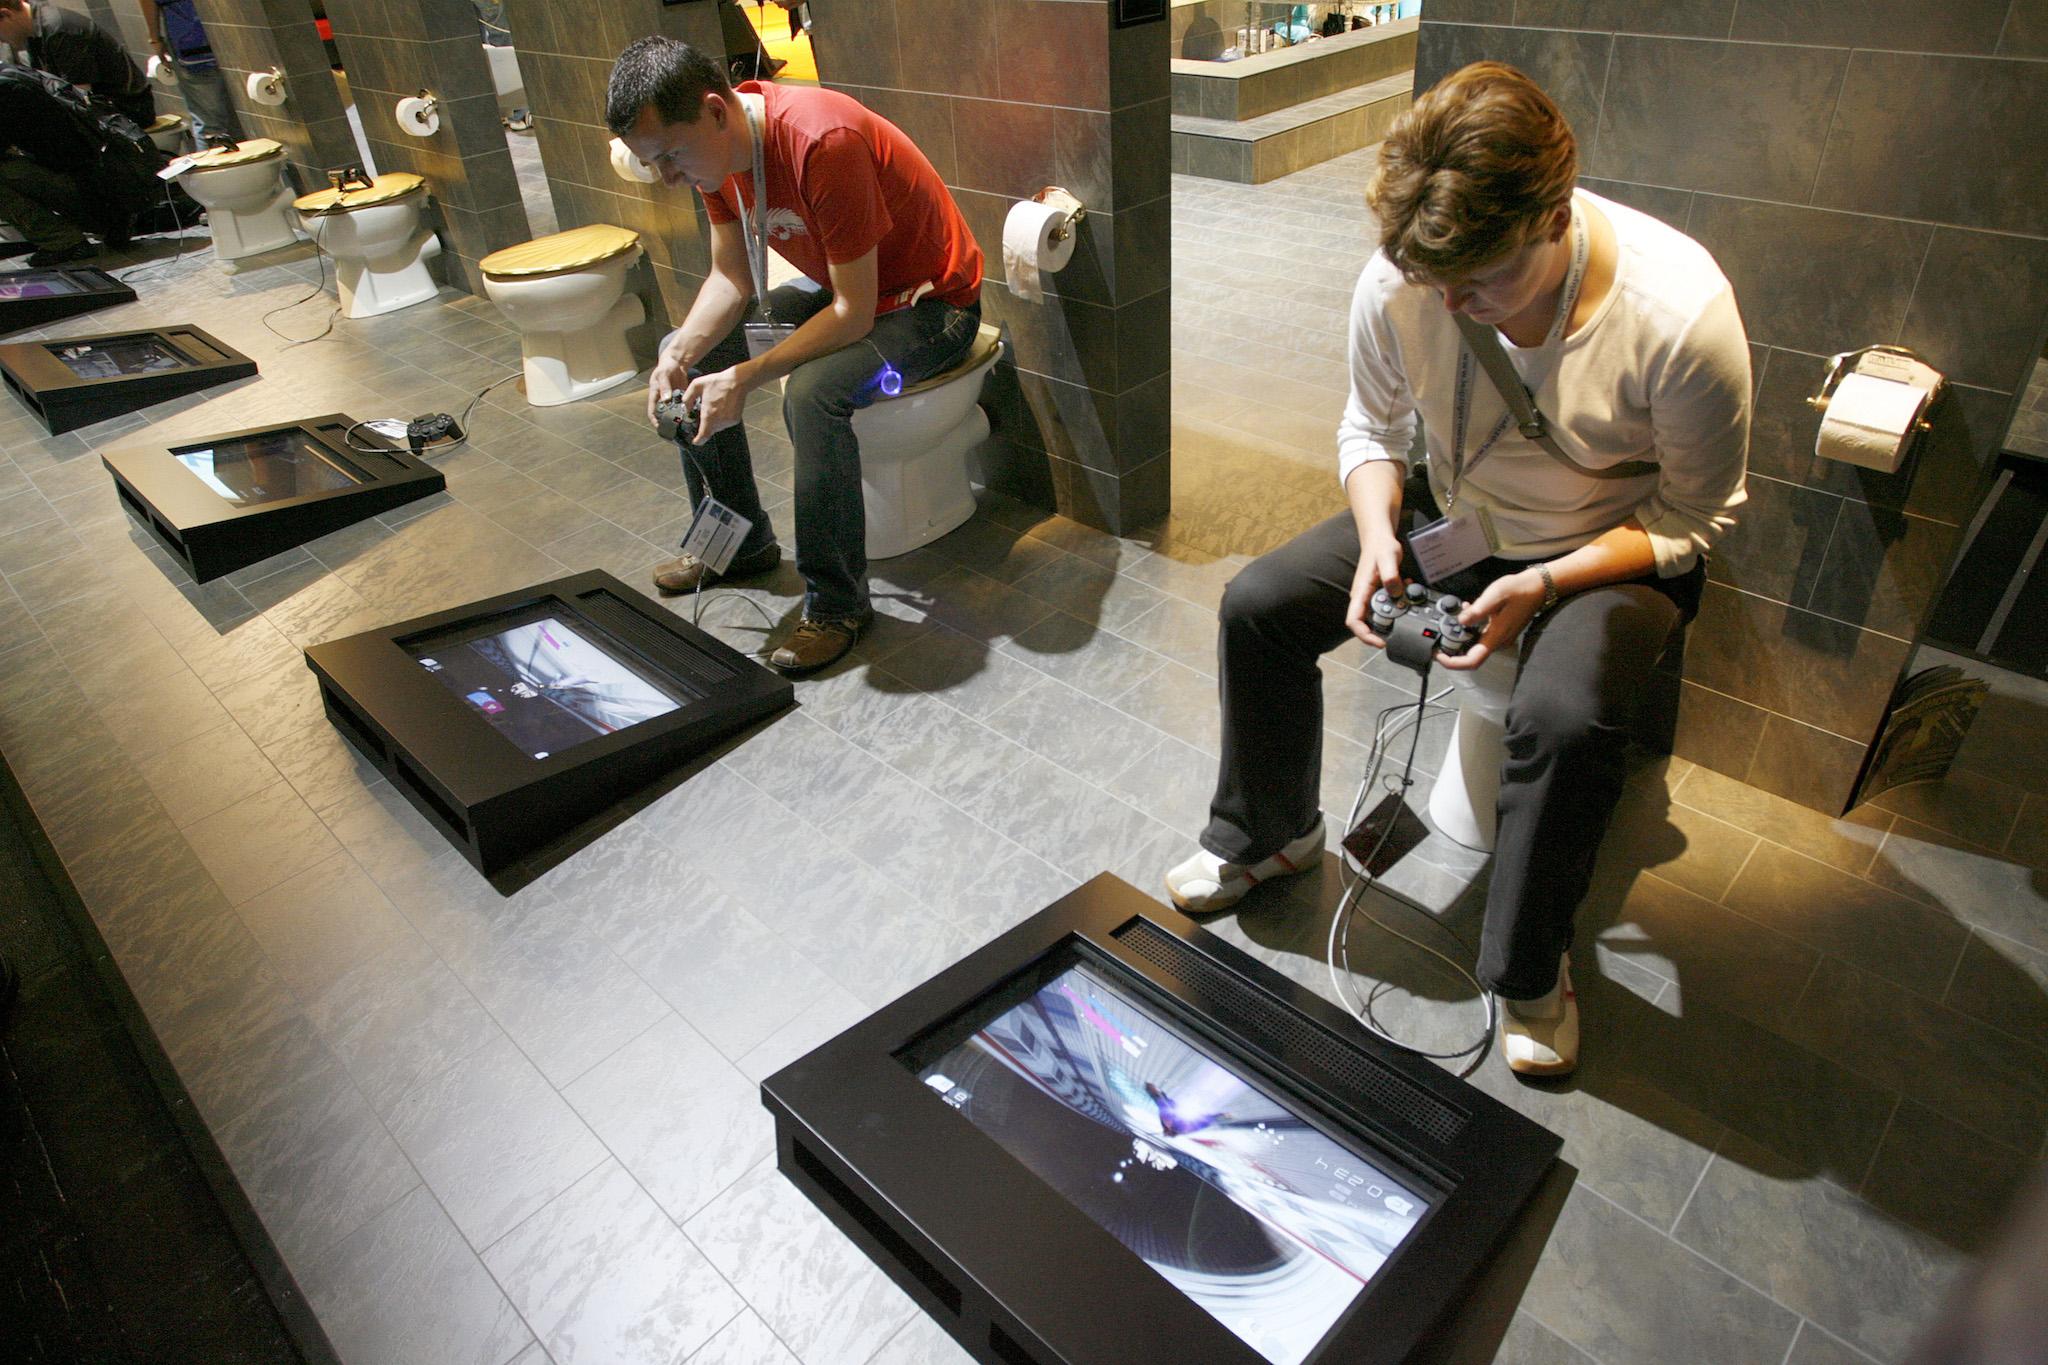 Visitors sit on toilet seats to play with Playstation 3 at an exhibition stand of Japanese Sony company at the Games Convention 2007 fair in the eastern German city of Leipzig August 22, 2007